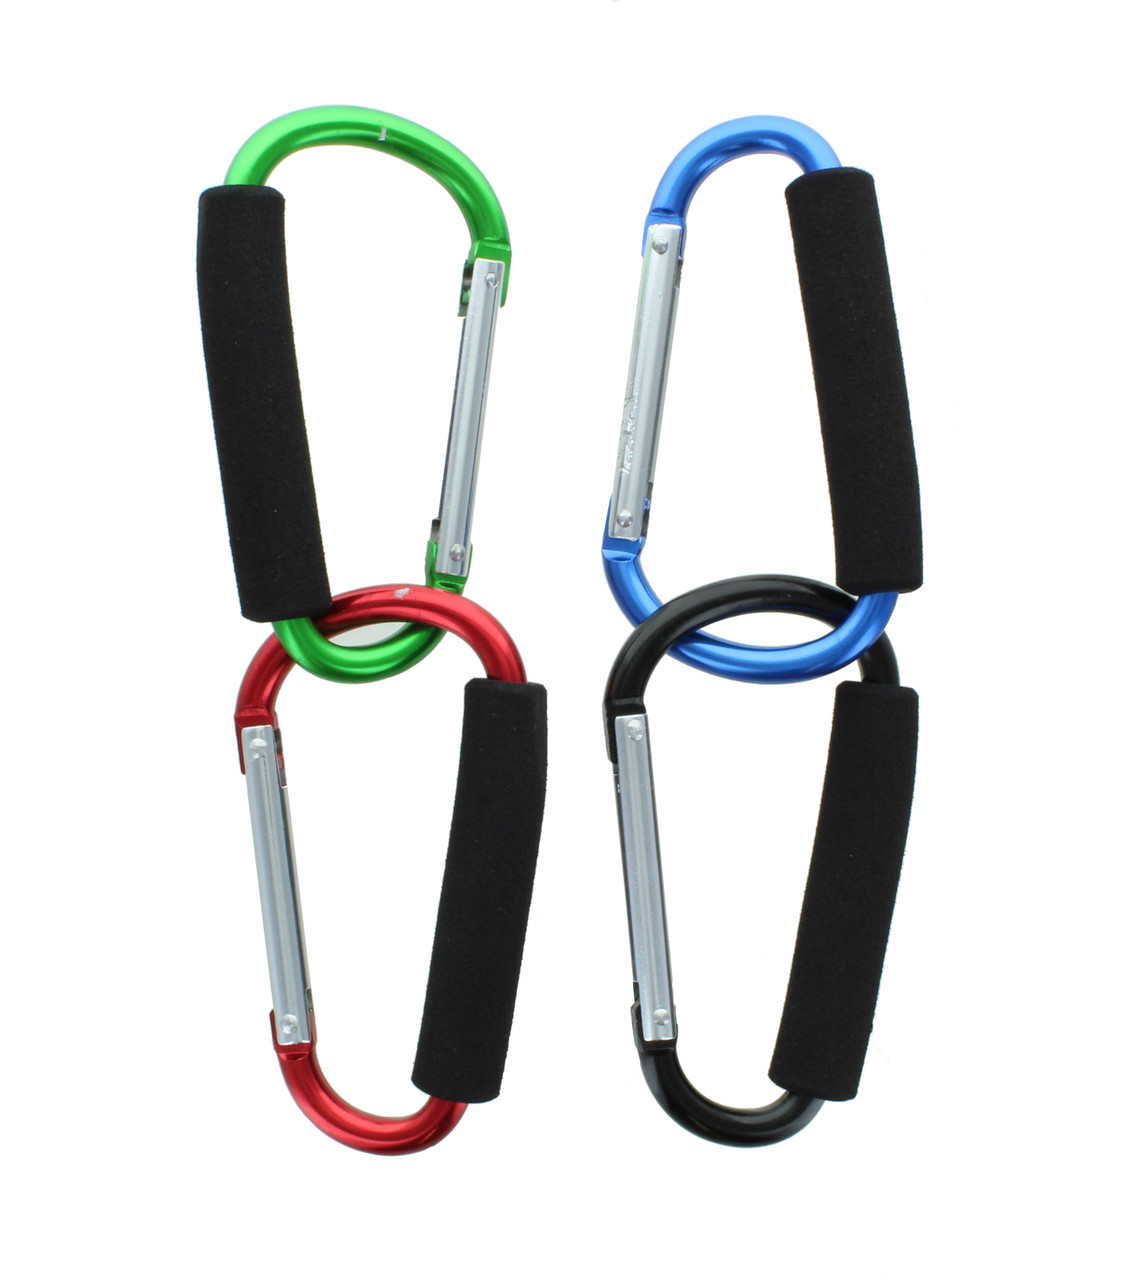 Lot of 4 Carrying Carabiners Jumbo Extra Large Spring Snap Hook Cushion  Grip - 1 Super Party